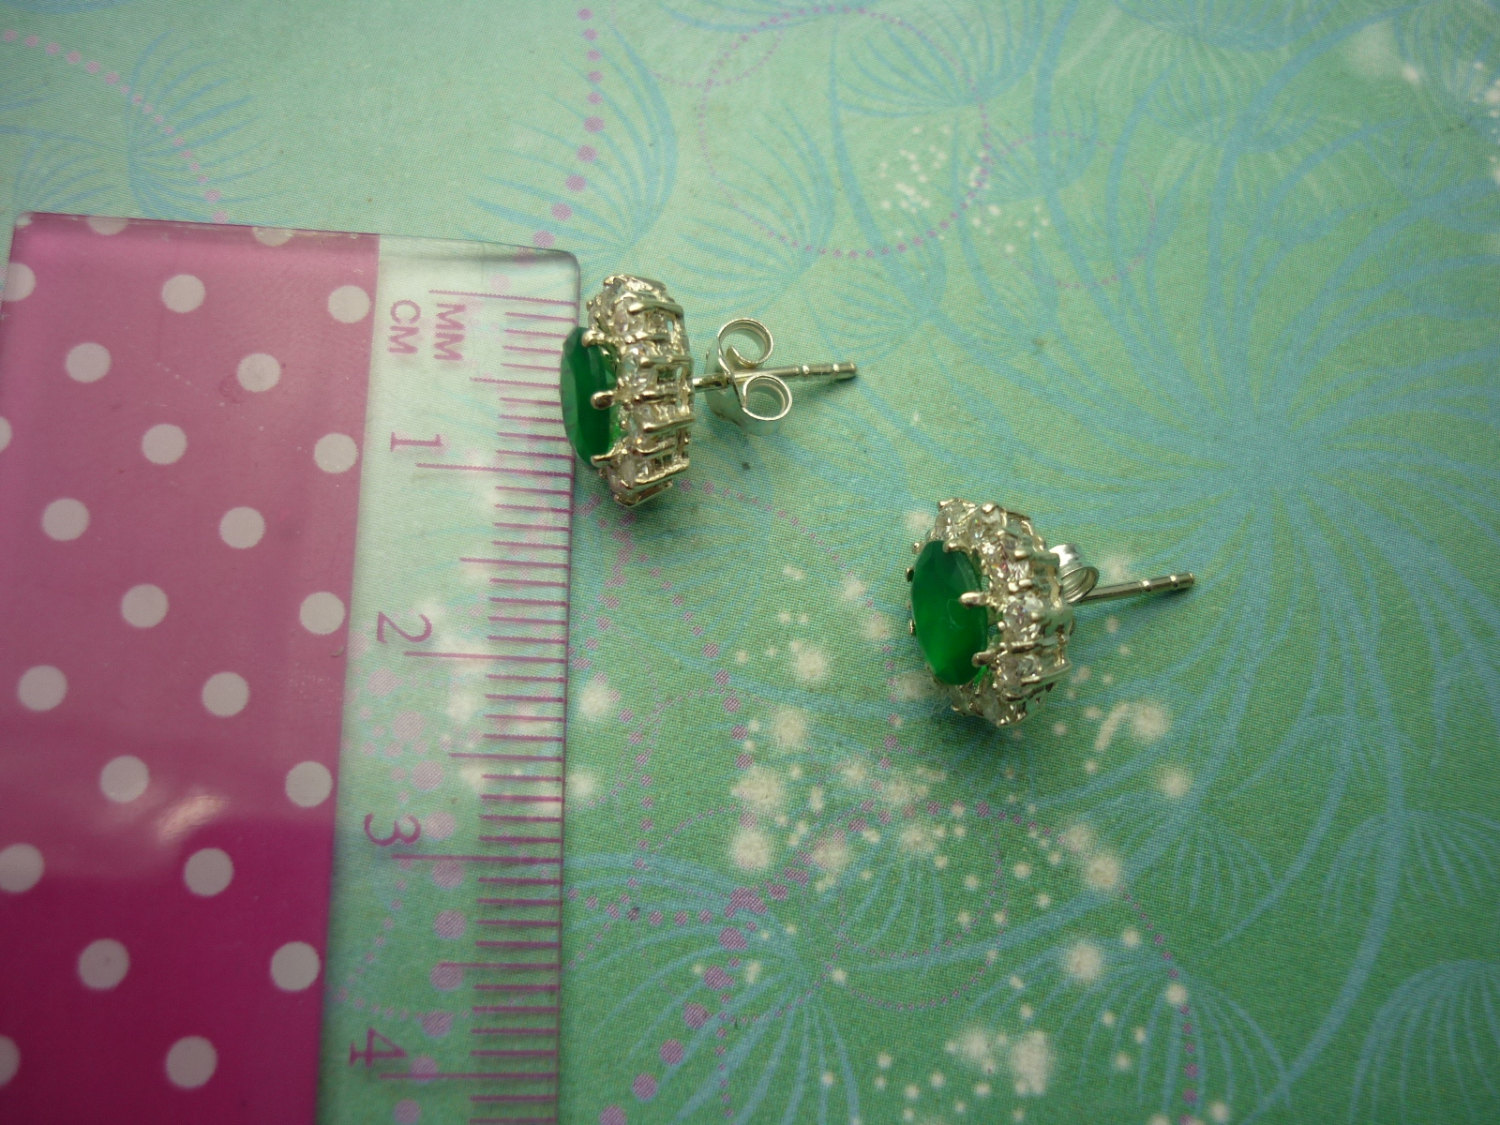 Vintage Sterling Silver Earrings - Green Chalcedony and Cubic Zirconias